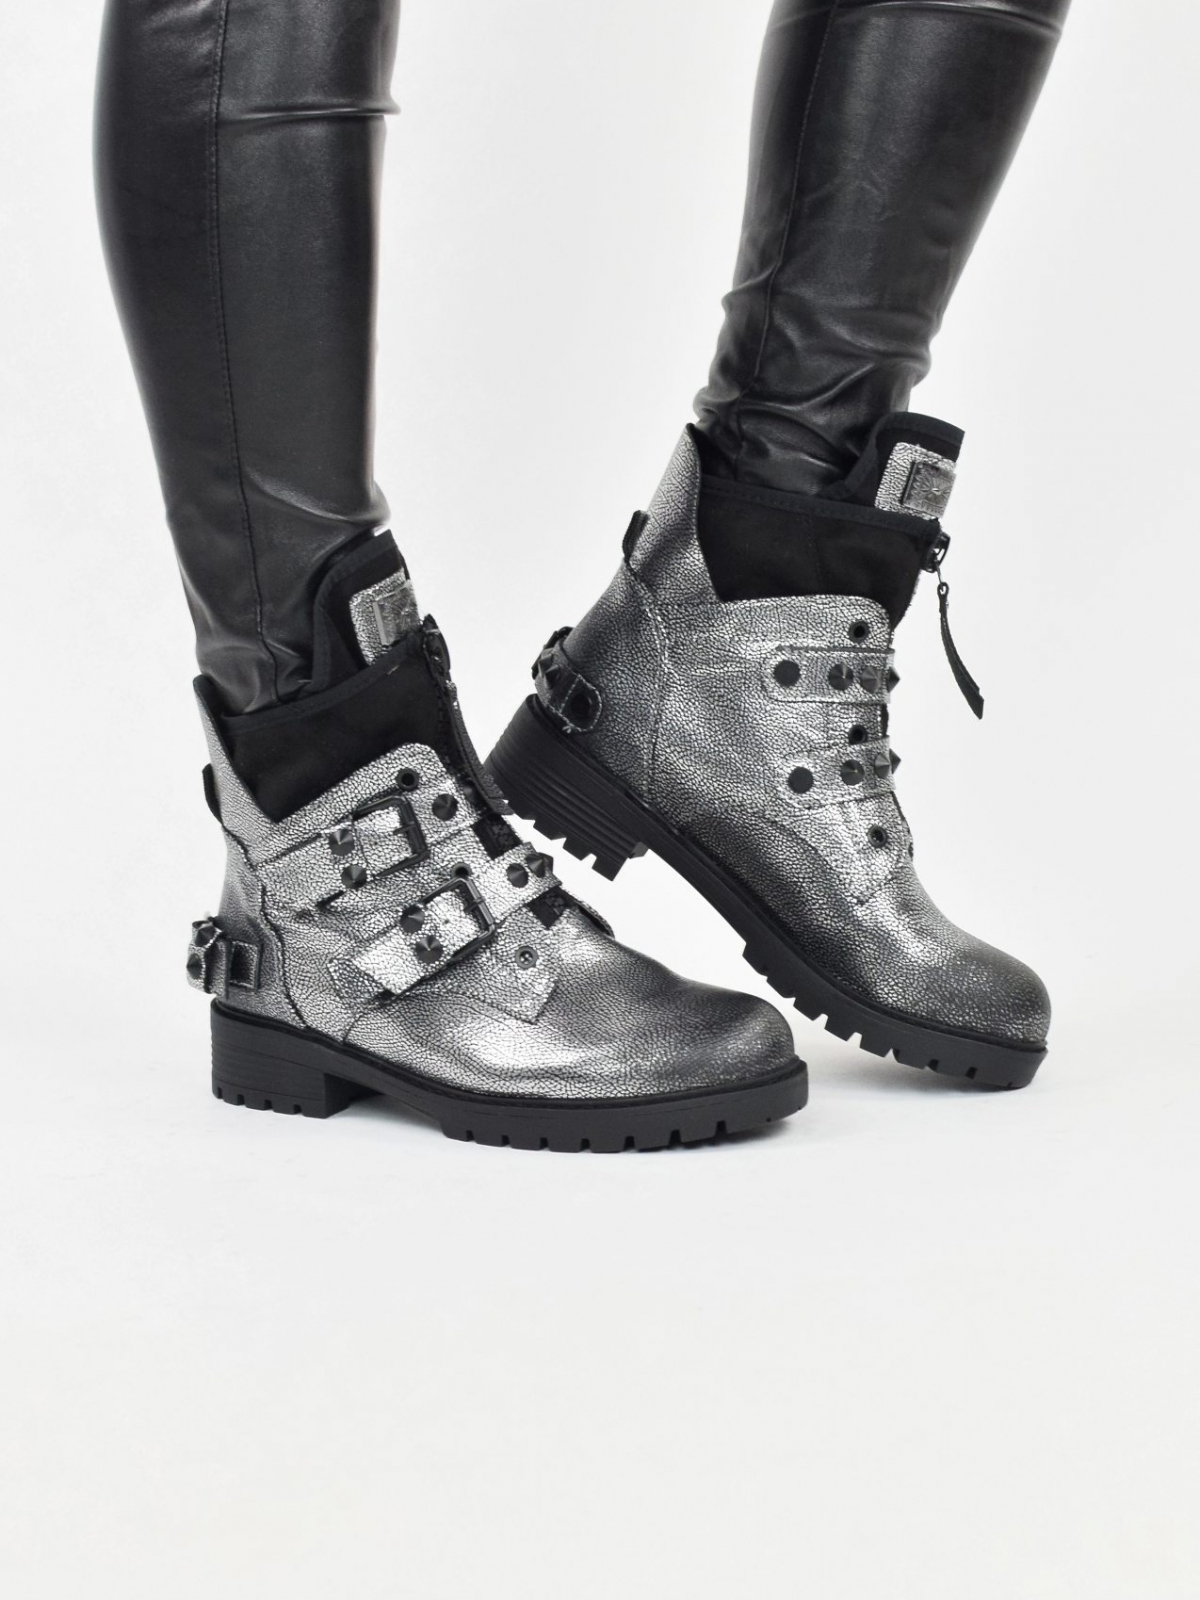 Stylish boots with buckles in metallic